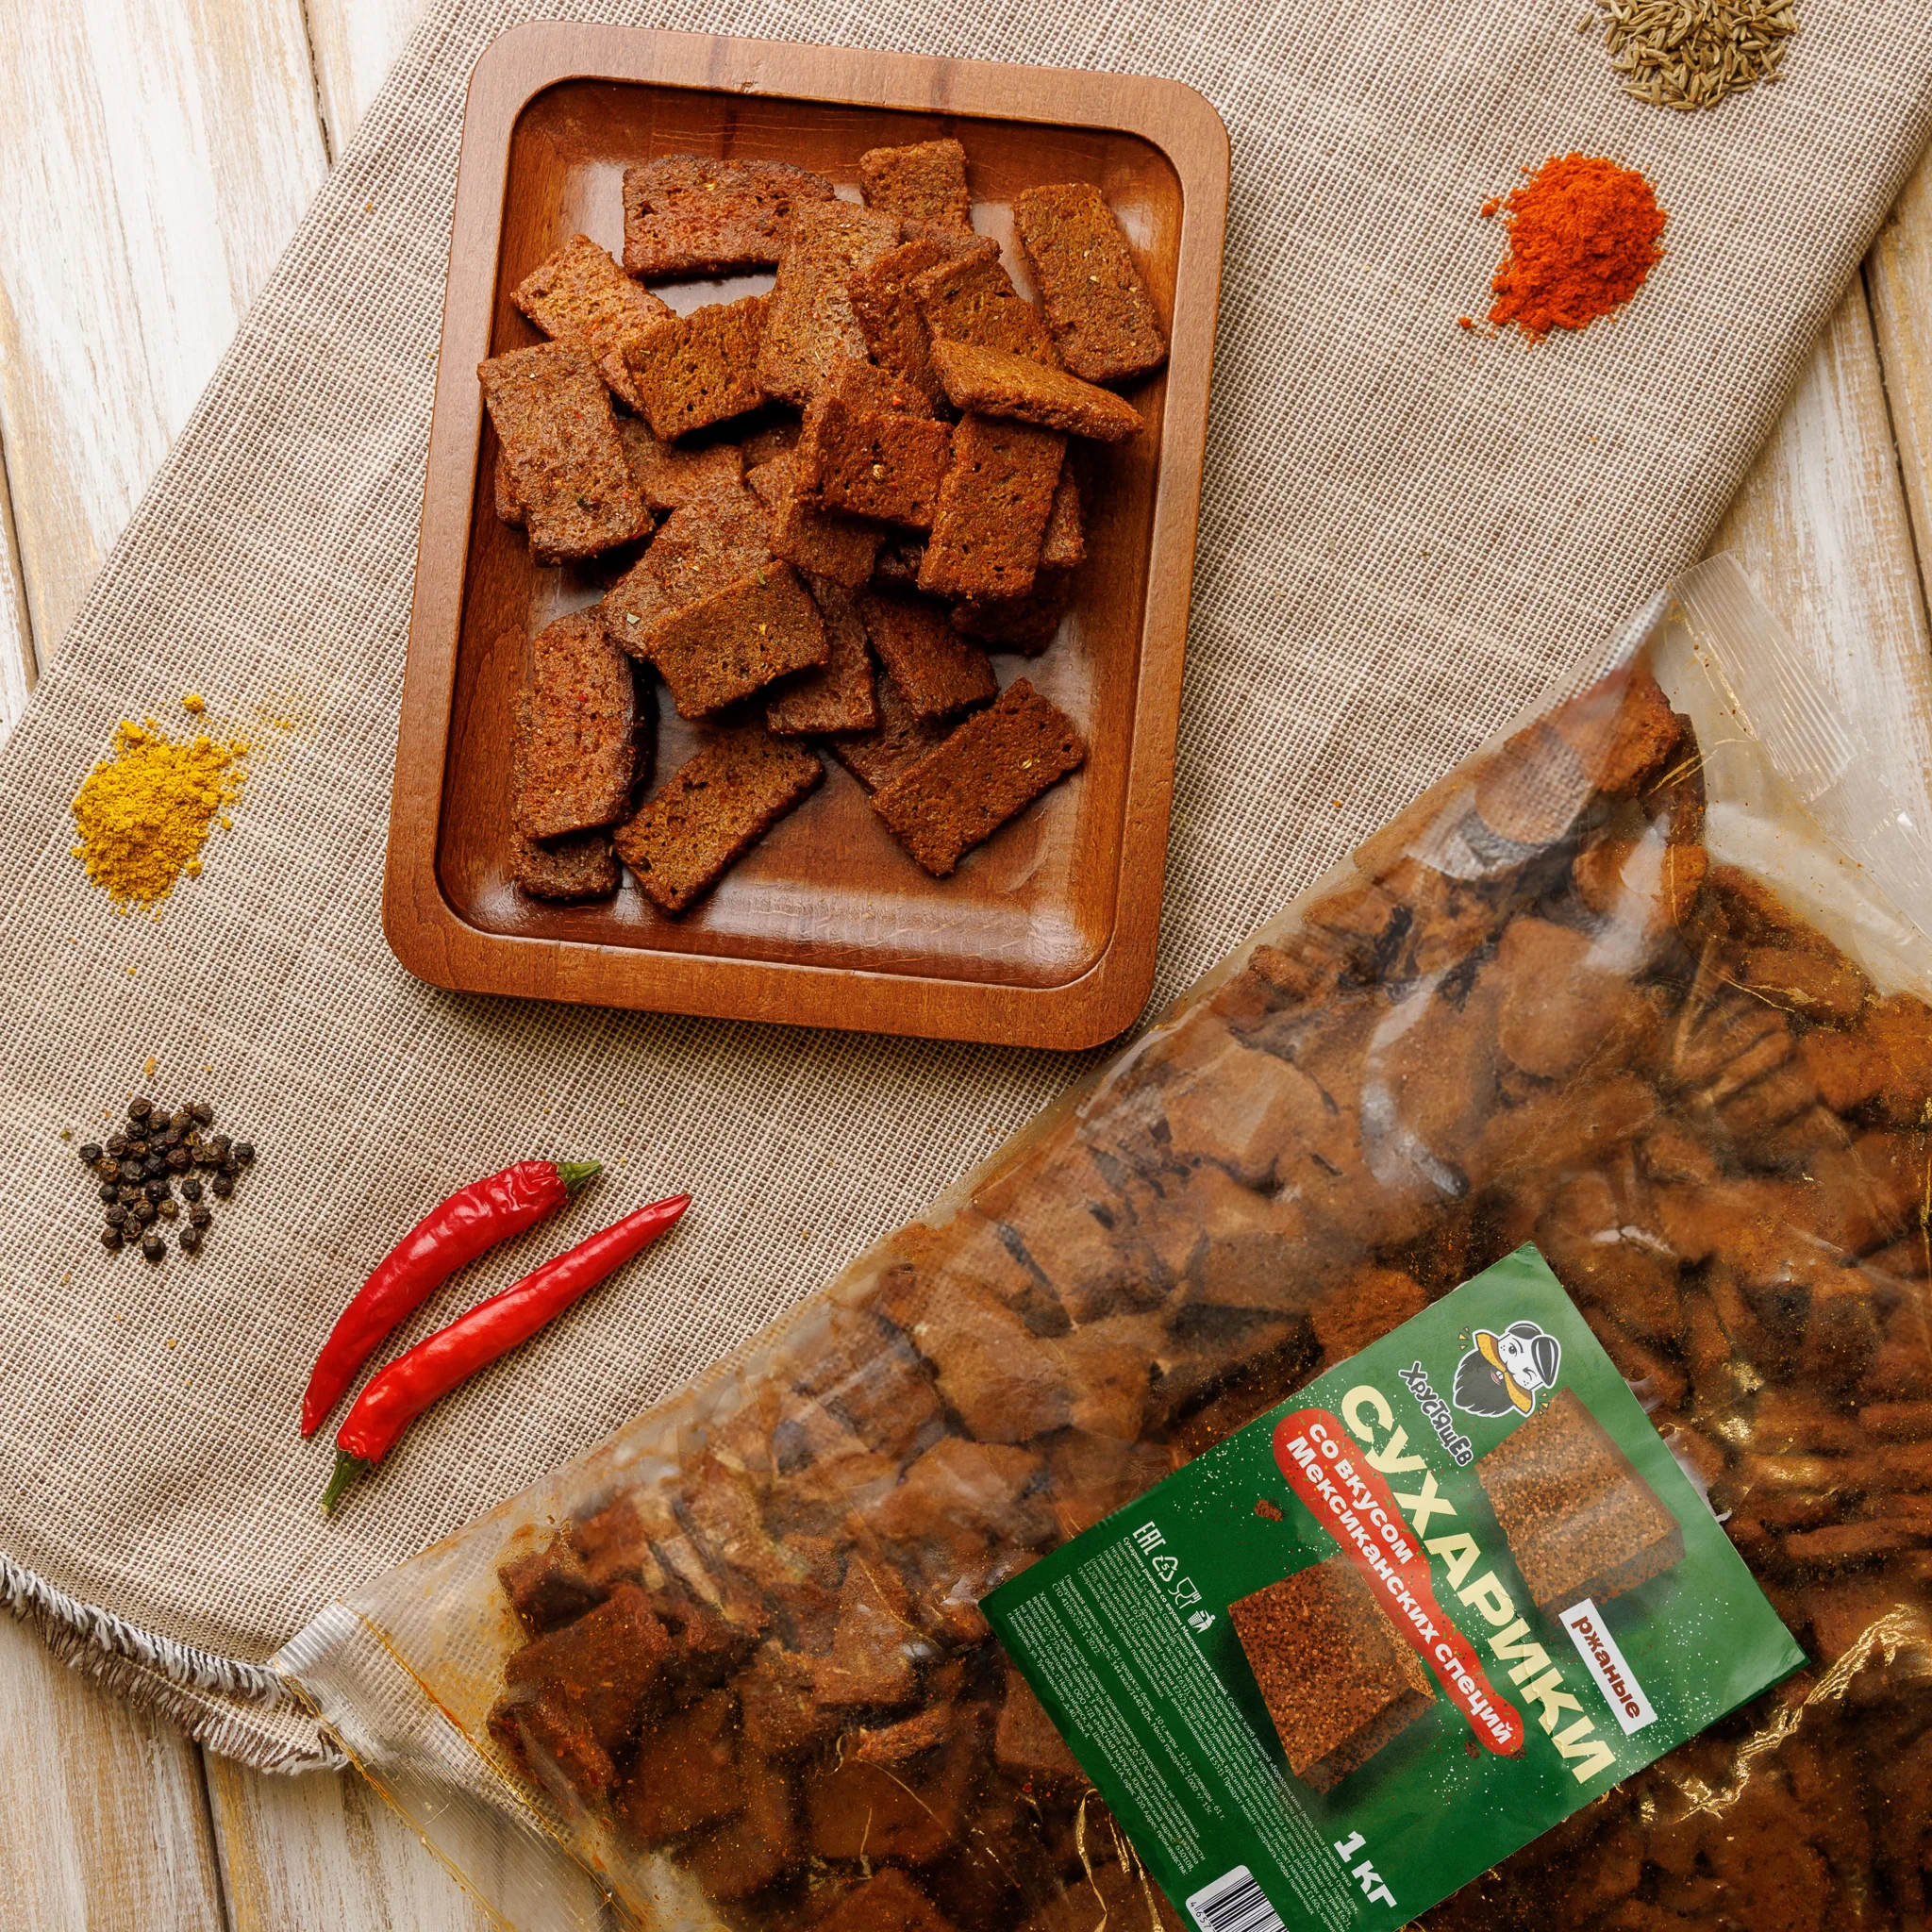 Rye "Borodinsky" crackers with Mexican spices 1 kg / "Borodinsky" crackers with Mexican spices 1000 gr / Croutons / Snacks for soup